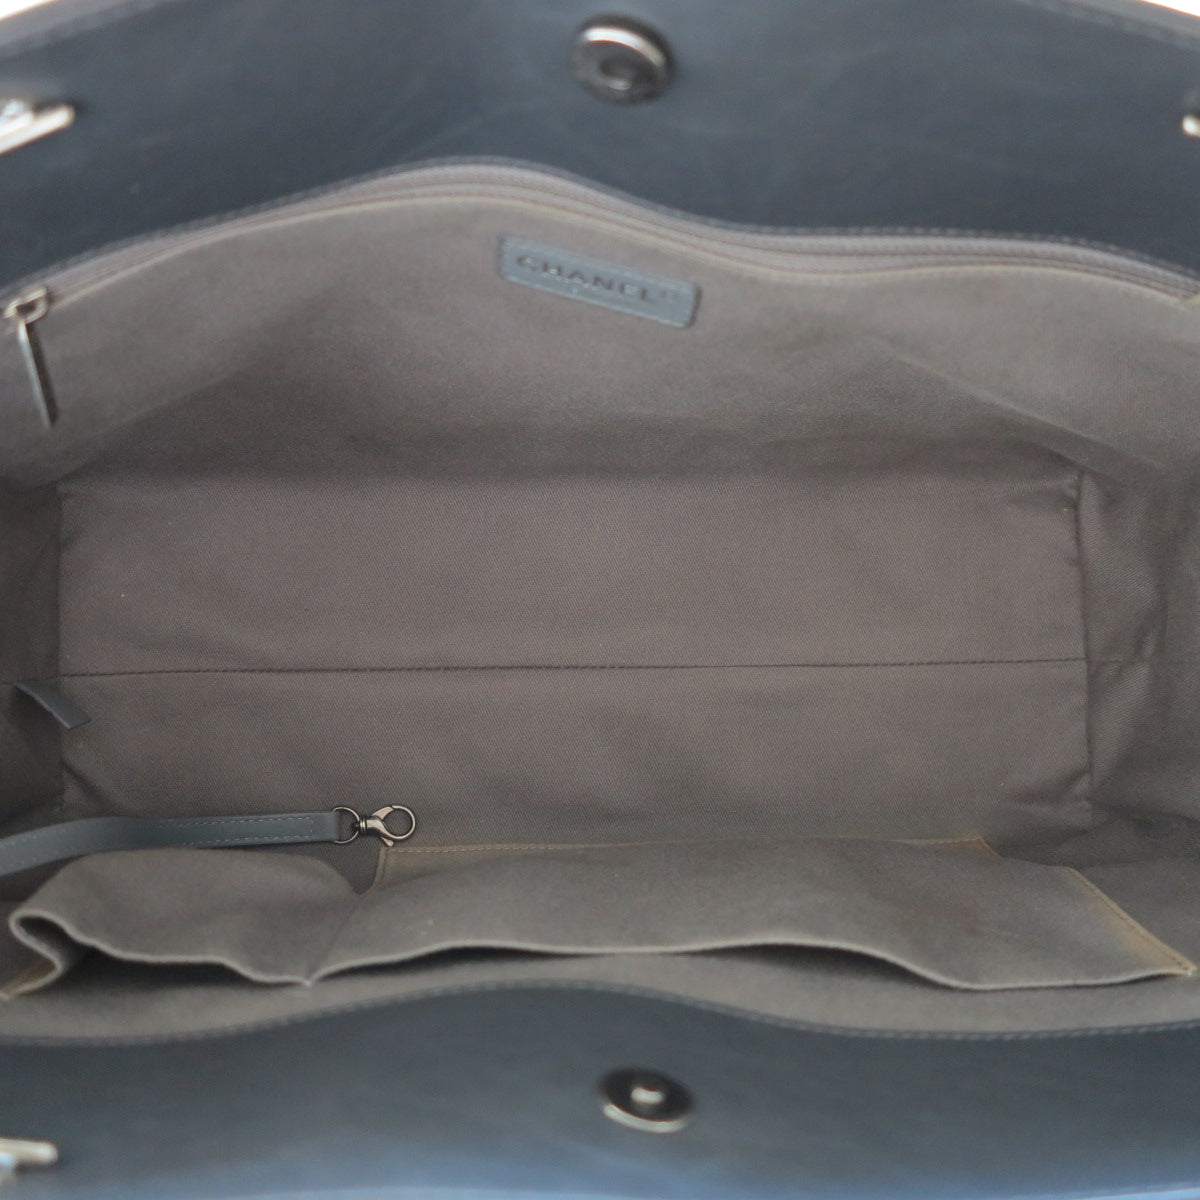 Large 2.55 Reissue Shopping Tote in Charcoal Grey Aged Calfskin